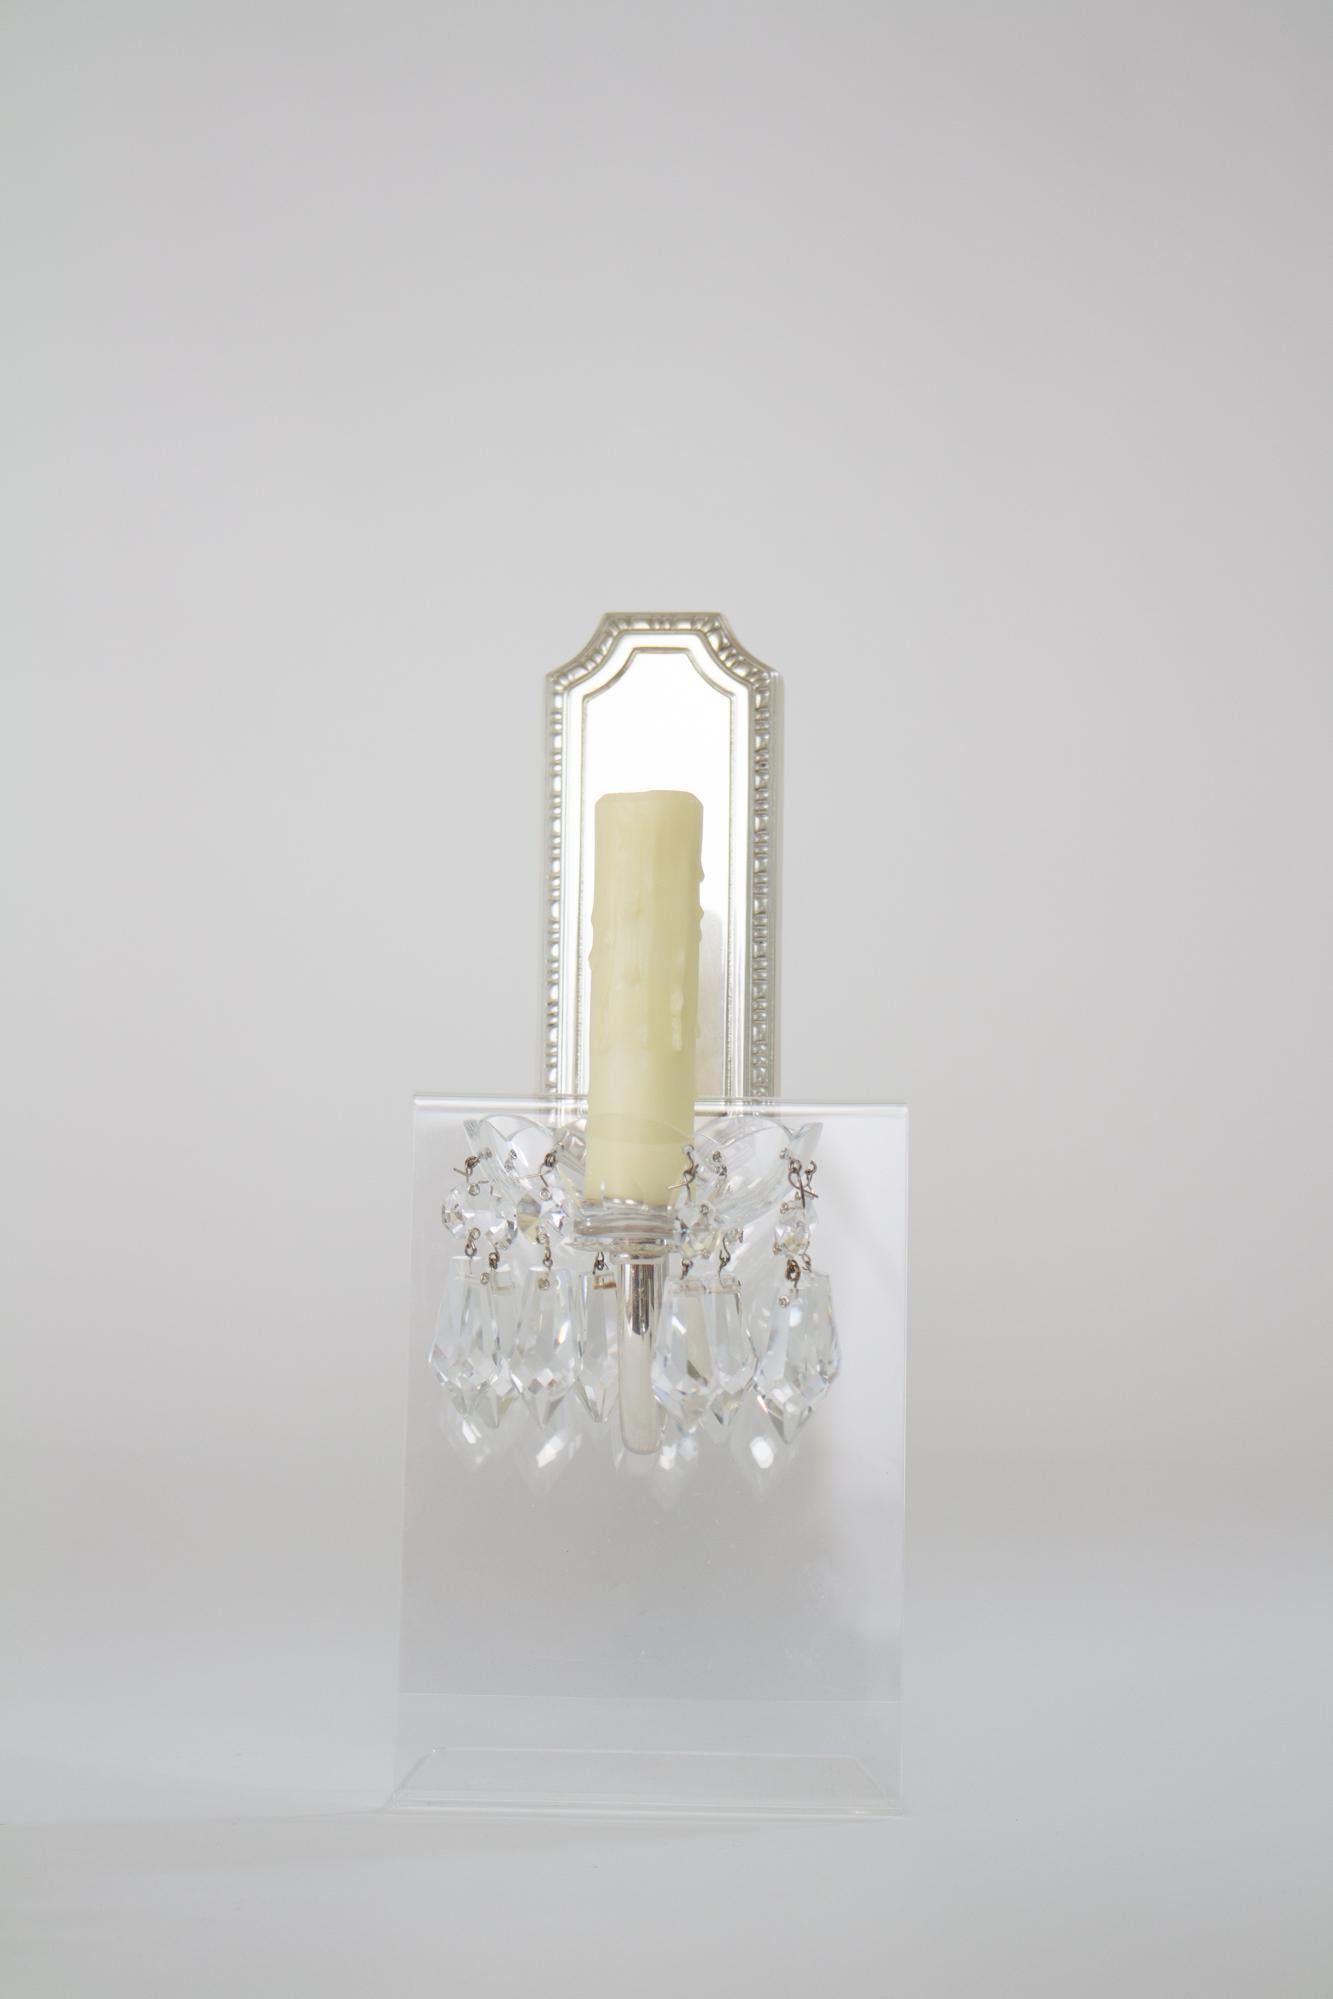 Custom silver plate sconces with crystals. These sconces have a narrow backplate, made to mount over a switch plate box, a declicate arm that curves up to hold a crystal bobeche and plug shaped crystal prisms. The crystal parts are all high quality